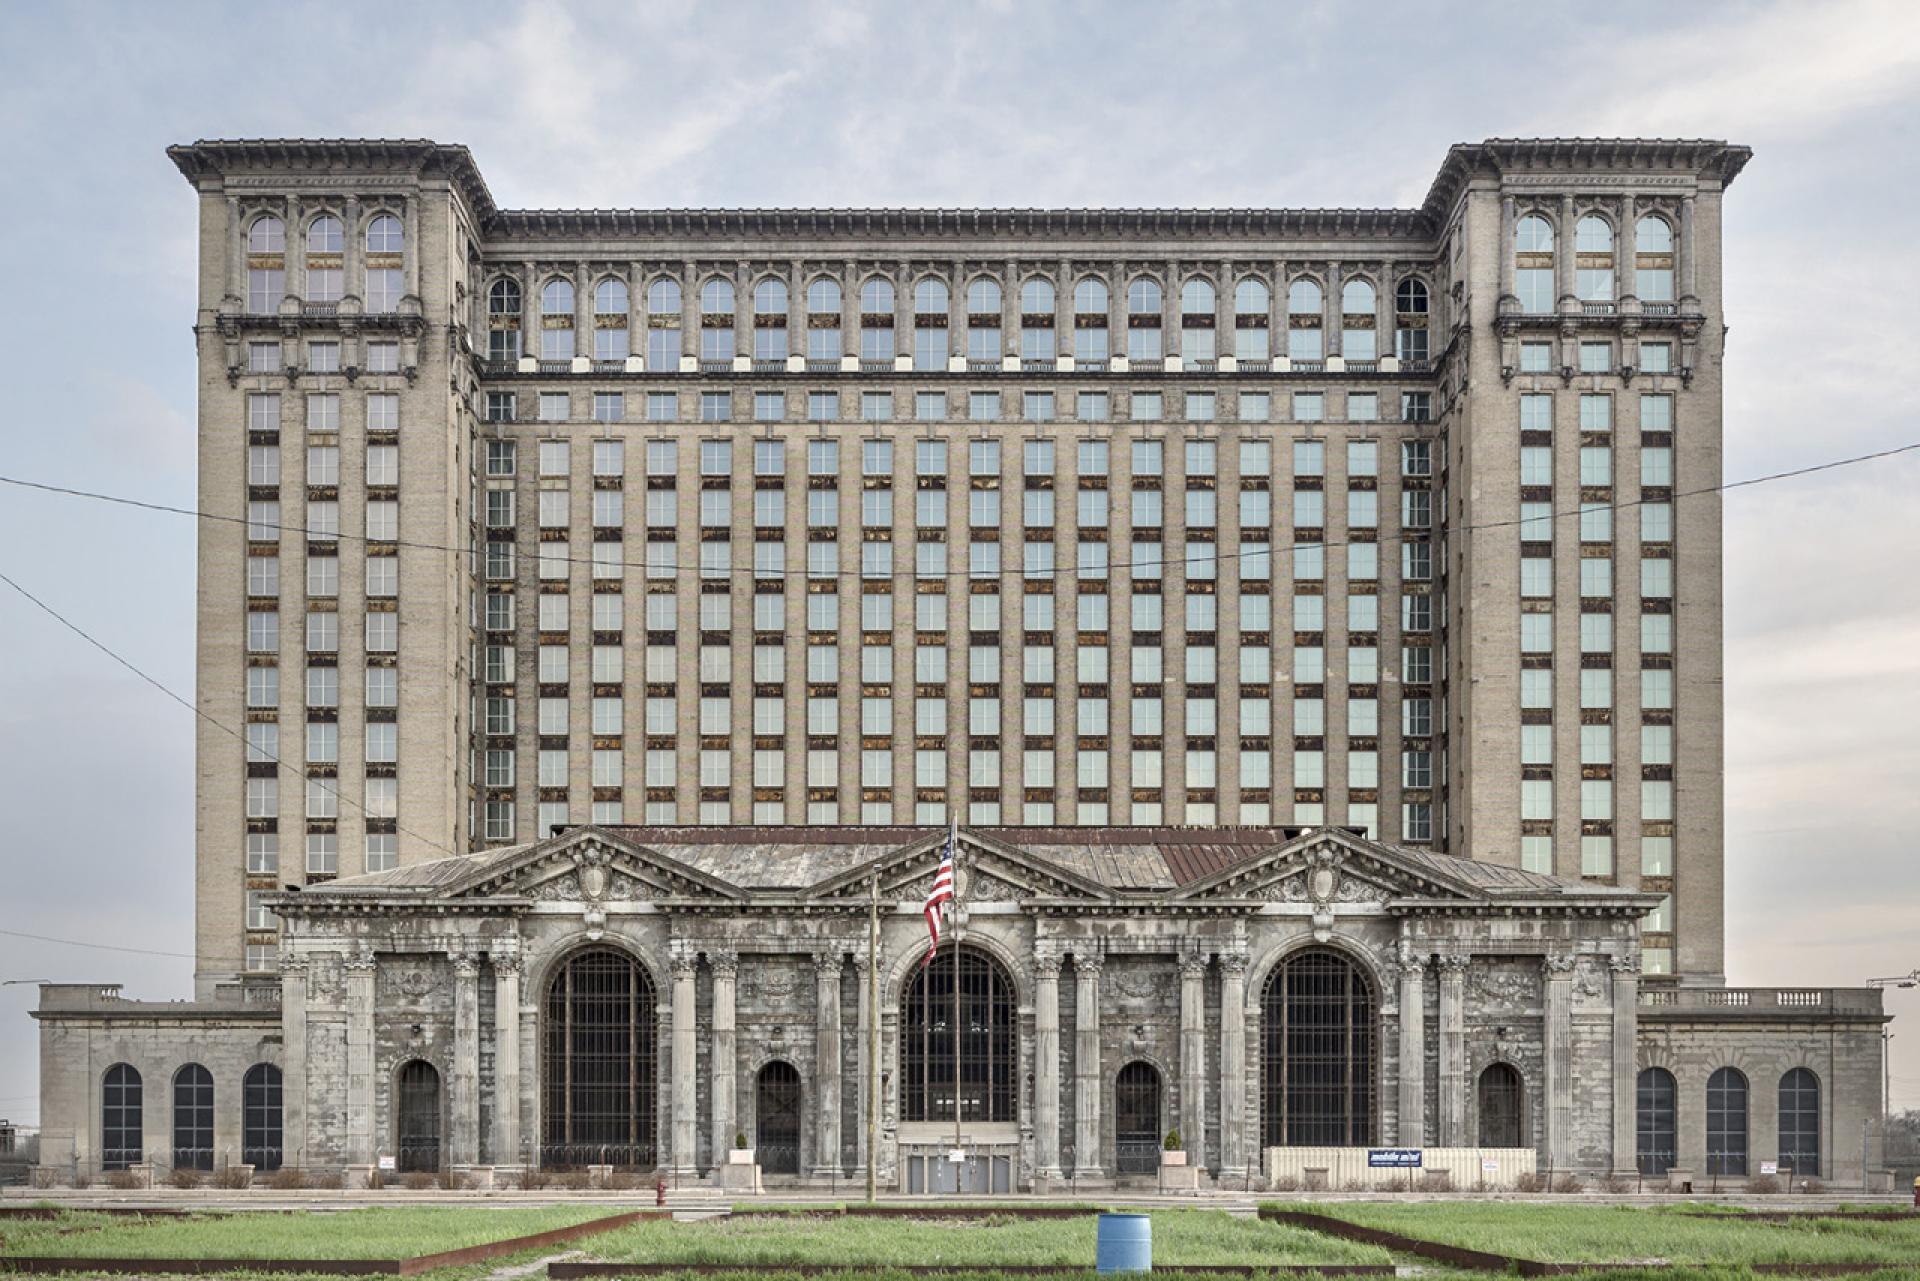 The Michigan Central Station by Warren & Wetmore and Reed and Stem (1914) in Detroit, Michigan USA. | Photo © Roberto Conte (2018)